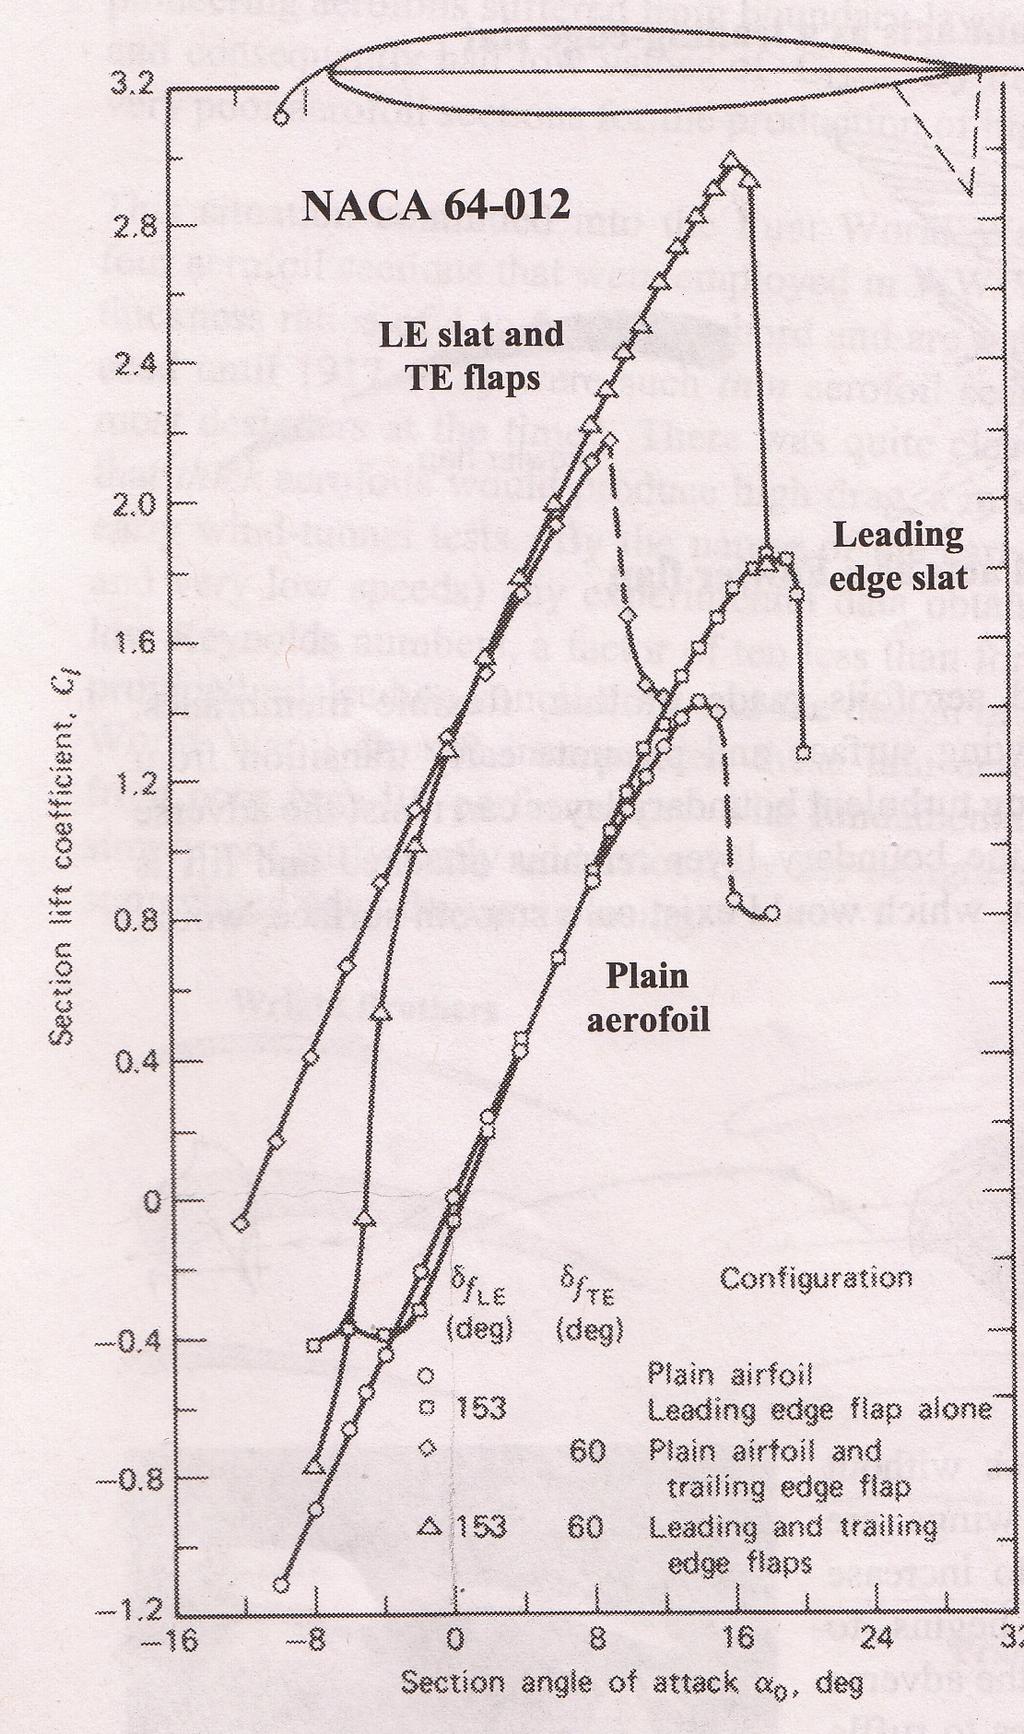 Examples of the effect of the shape of the basic airfoil on the lift coefficient are shown below. The NACA 64-012 airfoil is 12% thick and has 0 camber.